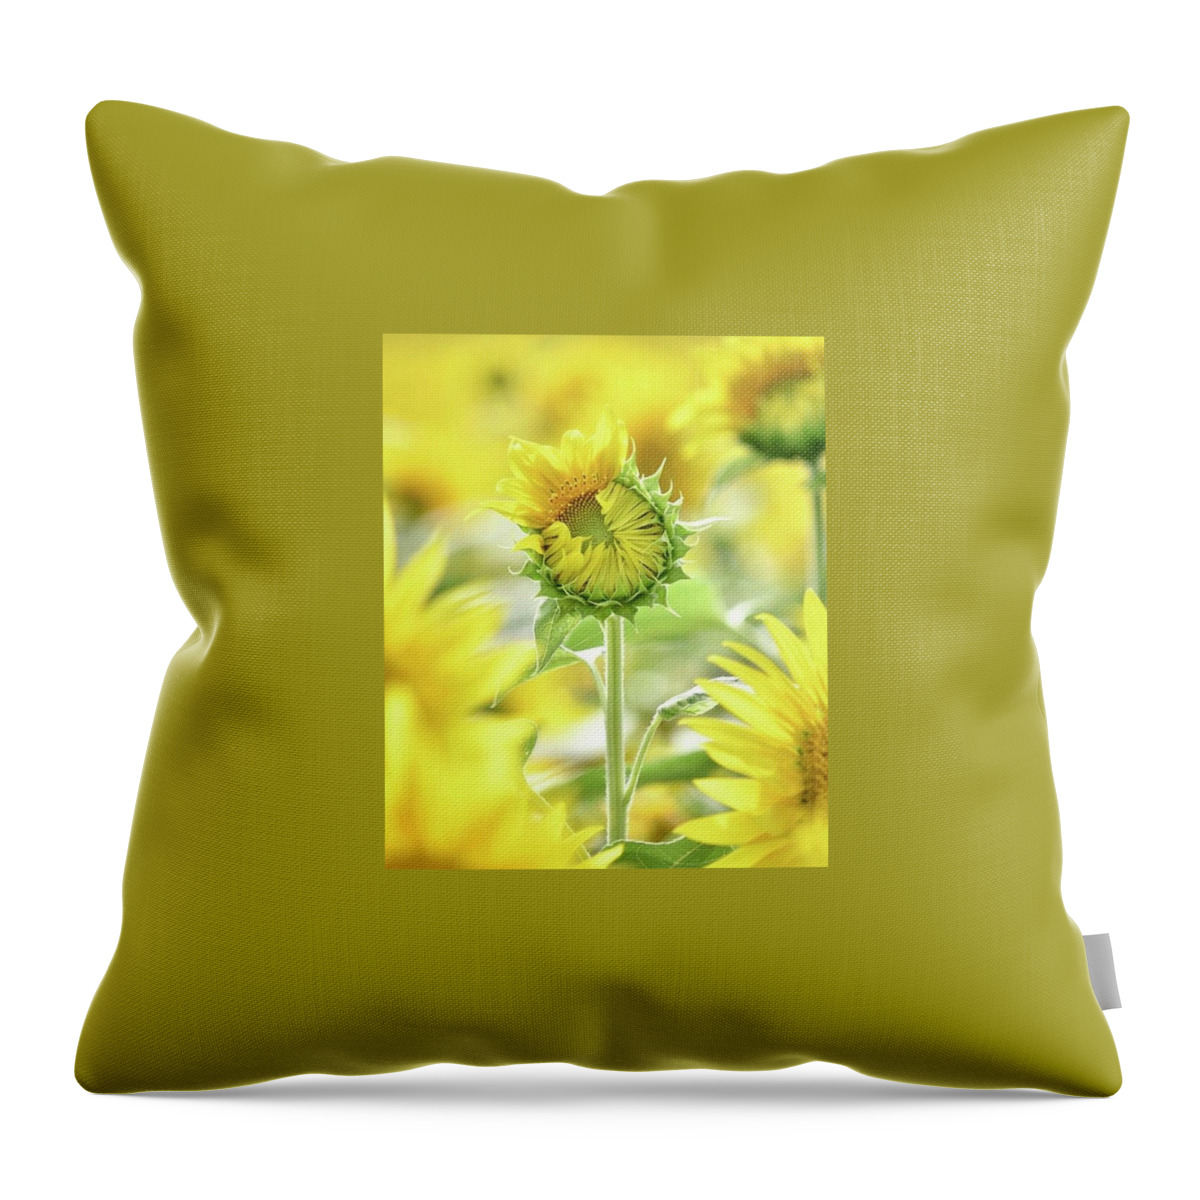 Sunflower Throw Pillow featuring the photograph Sumertime by Carolyn Mickulas